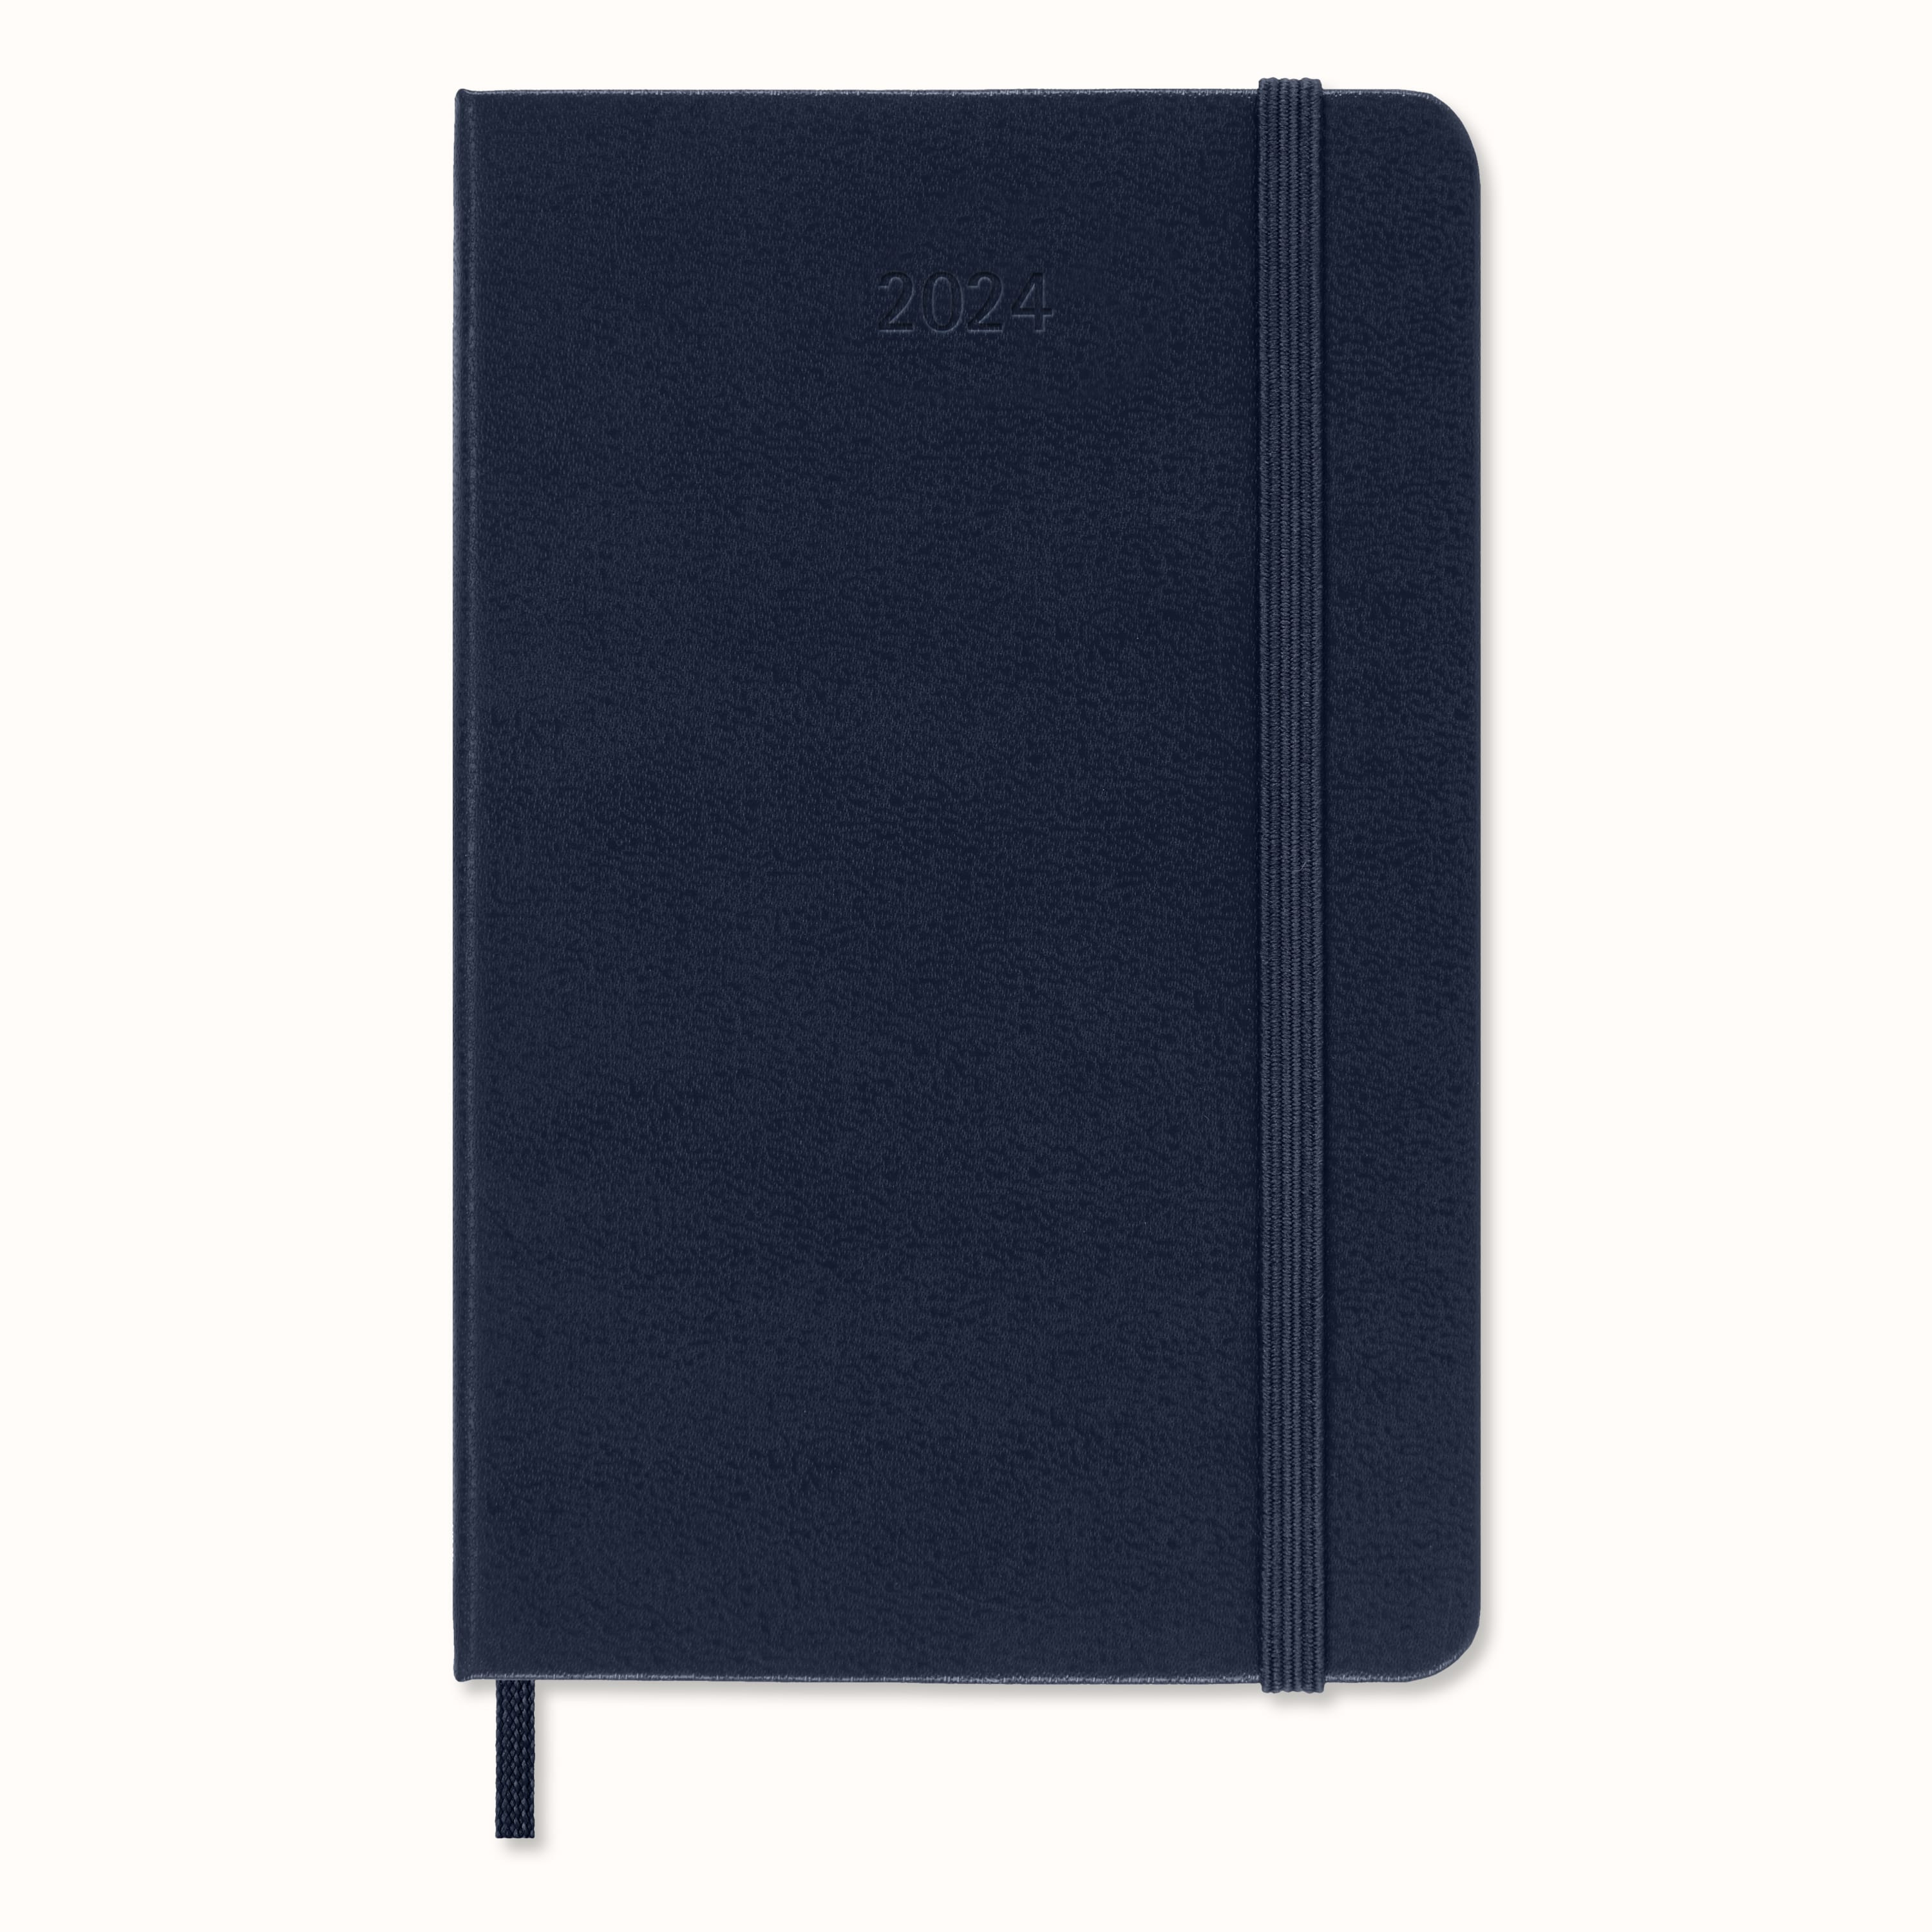  Moleskine Classic 12 Month 2023 Daily Planner, Hard Cover,  Pocket (3.5 x 5.5), Sapphire Blue : Office Products